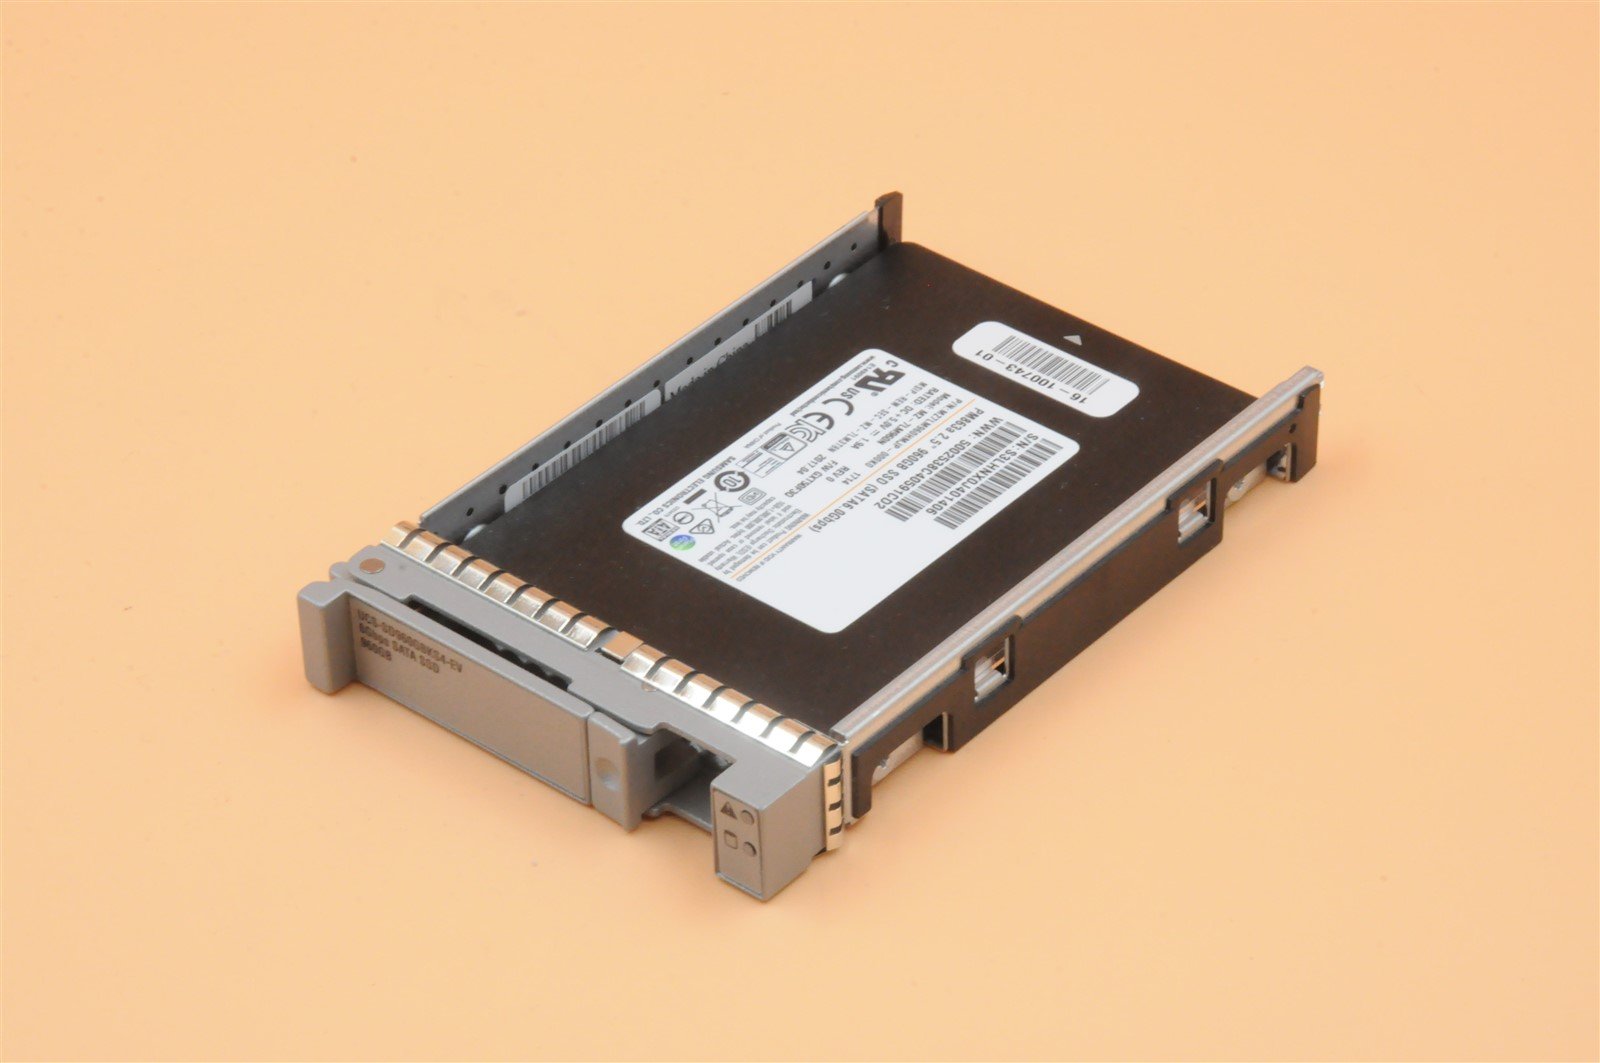 UCS-SD960GBKS4-EV MZ-7LM960N PM863A CISCO 960GB 6G 2.5" SATA TLC SOLID STATE DRIVE